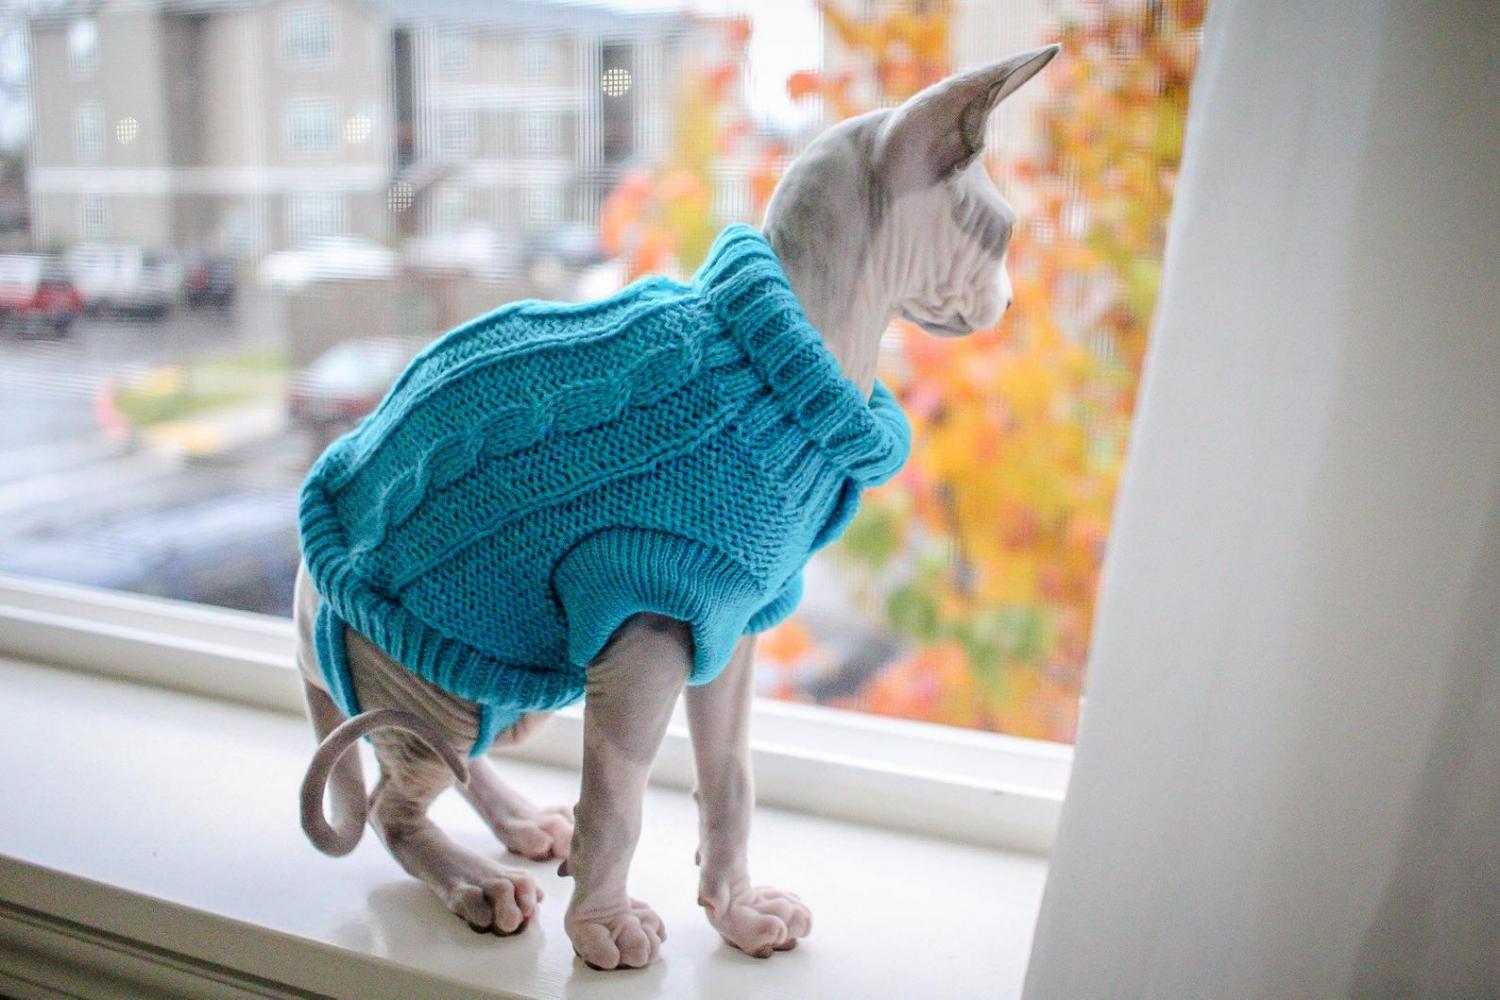 Cat Cardigan Sweater - Sweater for cats